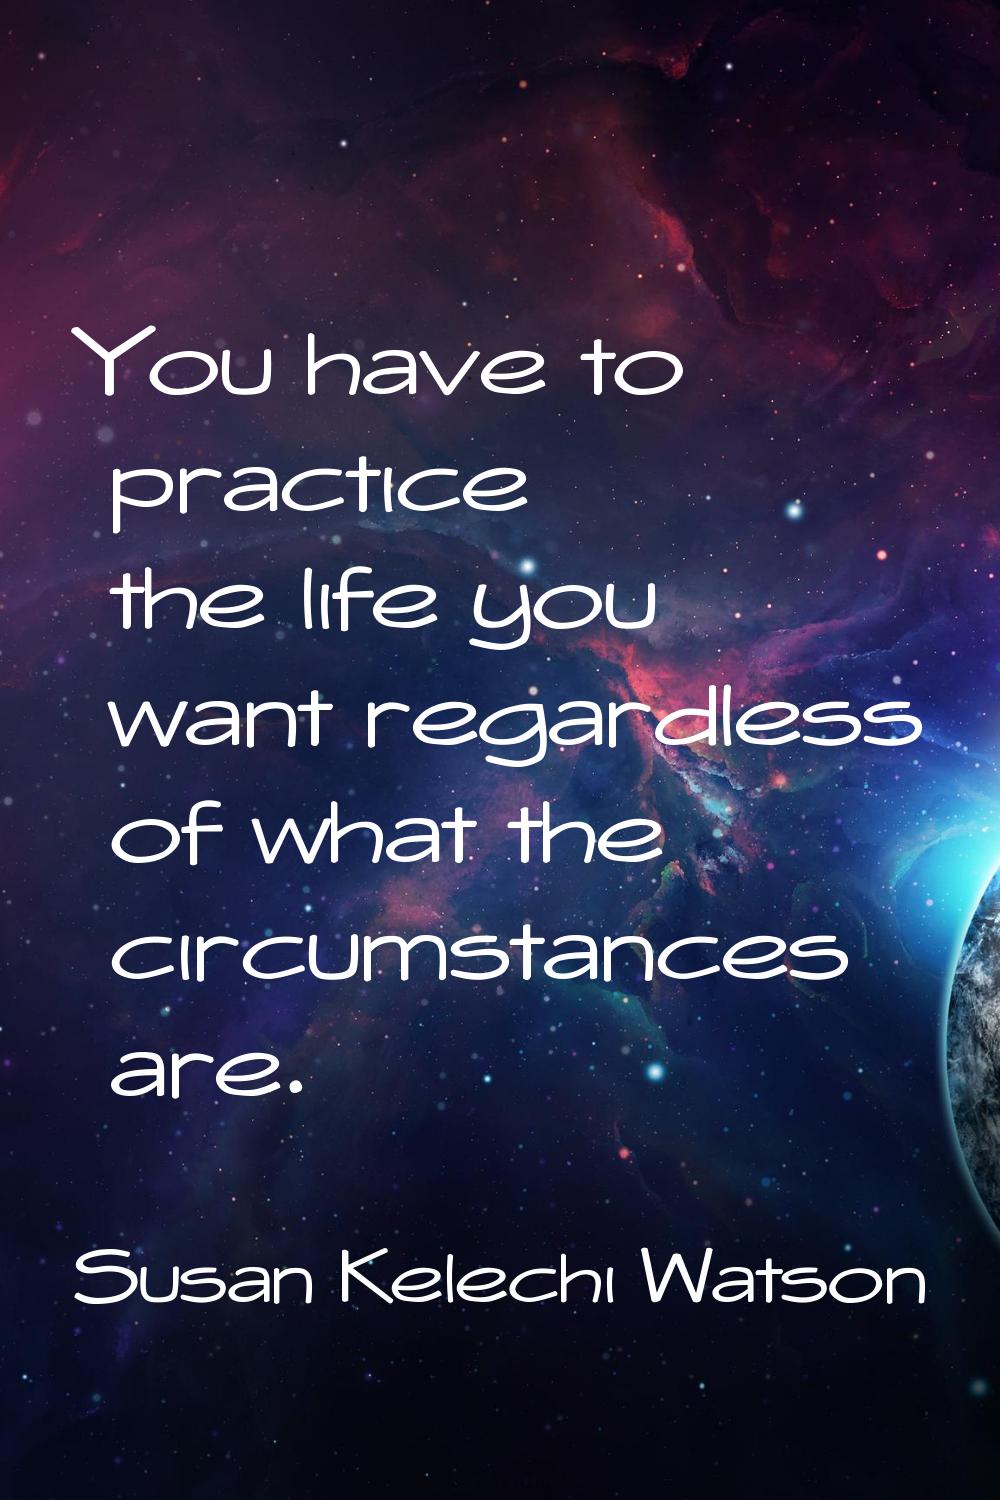 You have to practice the life you want regardless of what the circumstances are.